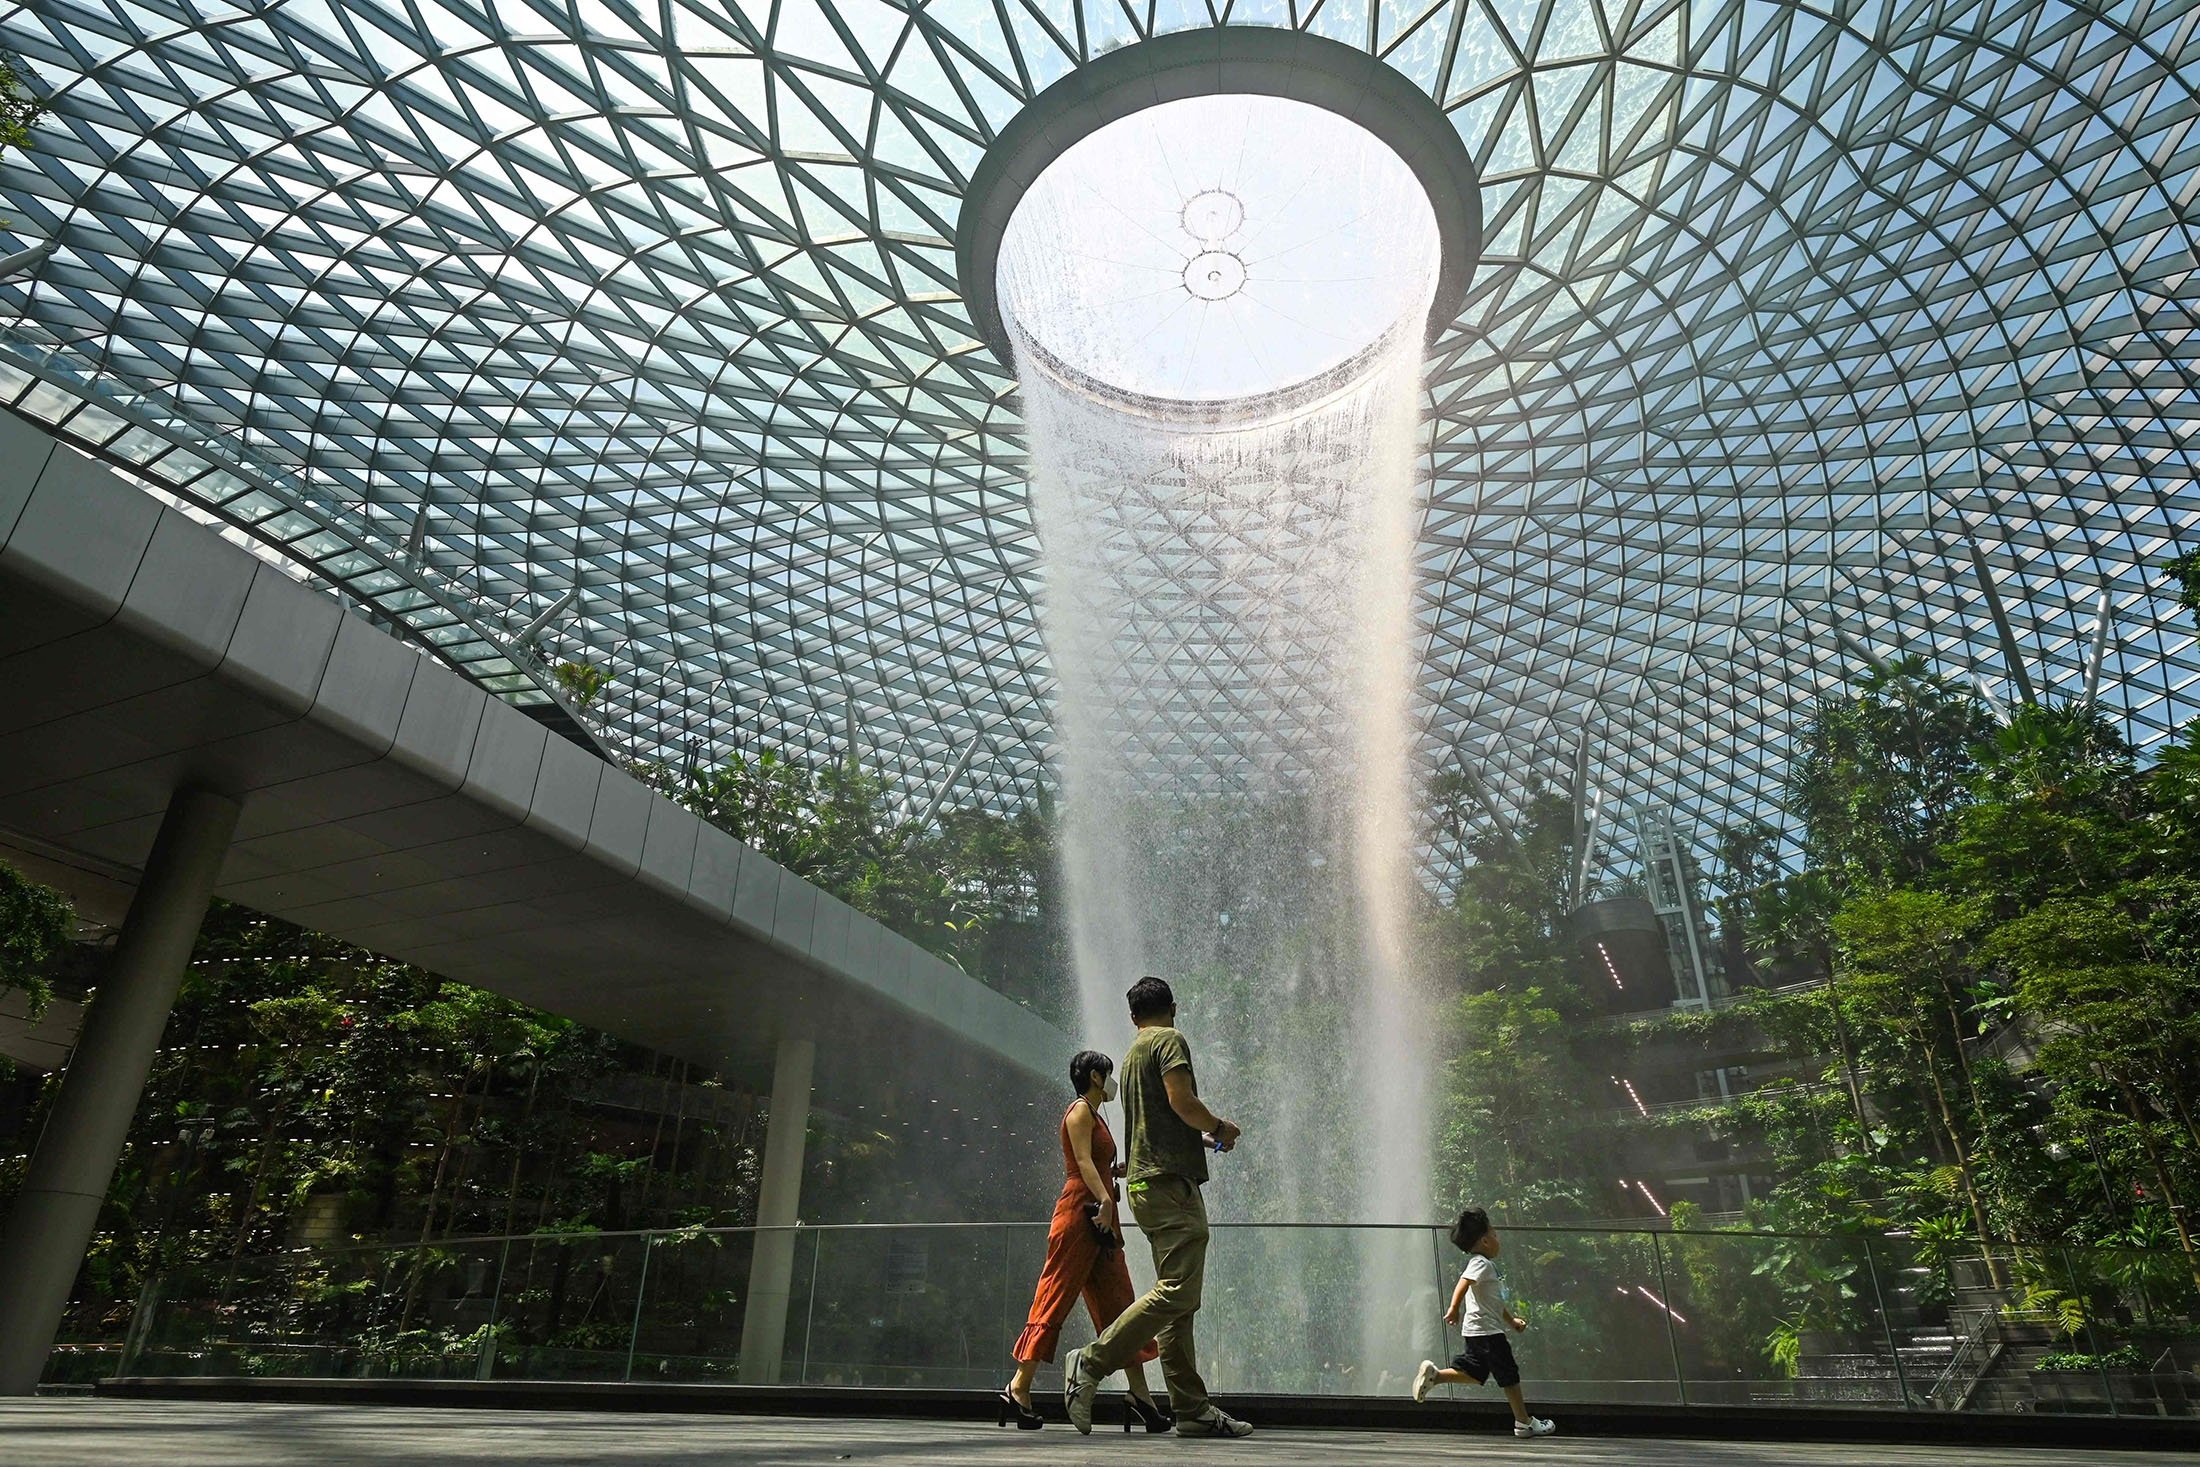 A family walks past the rain vortex at Jewel Changi Airport in Singapore, June 23, 2021. (AFP Photo)